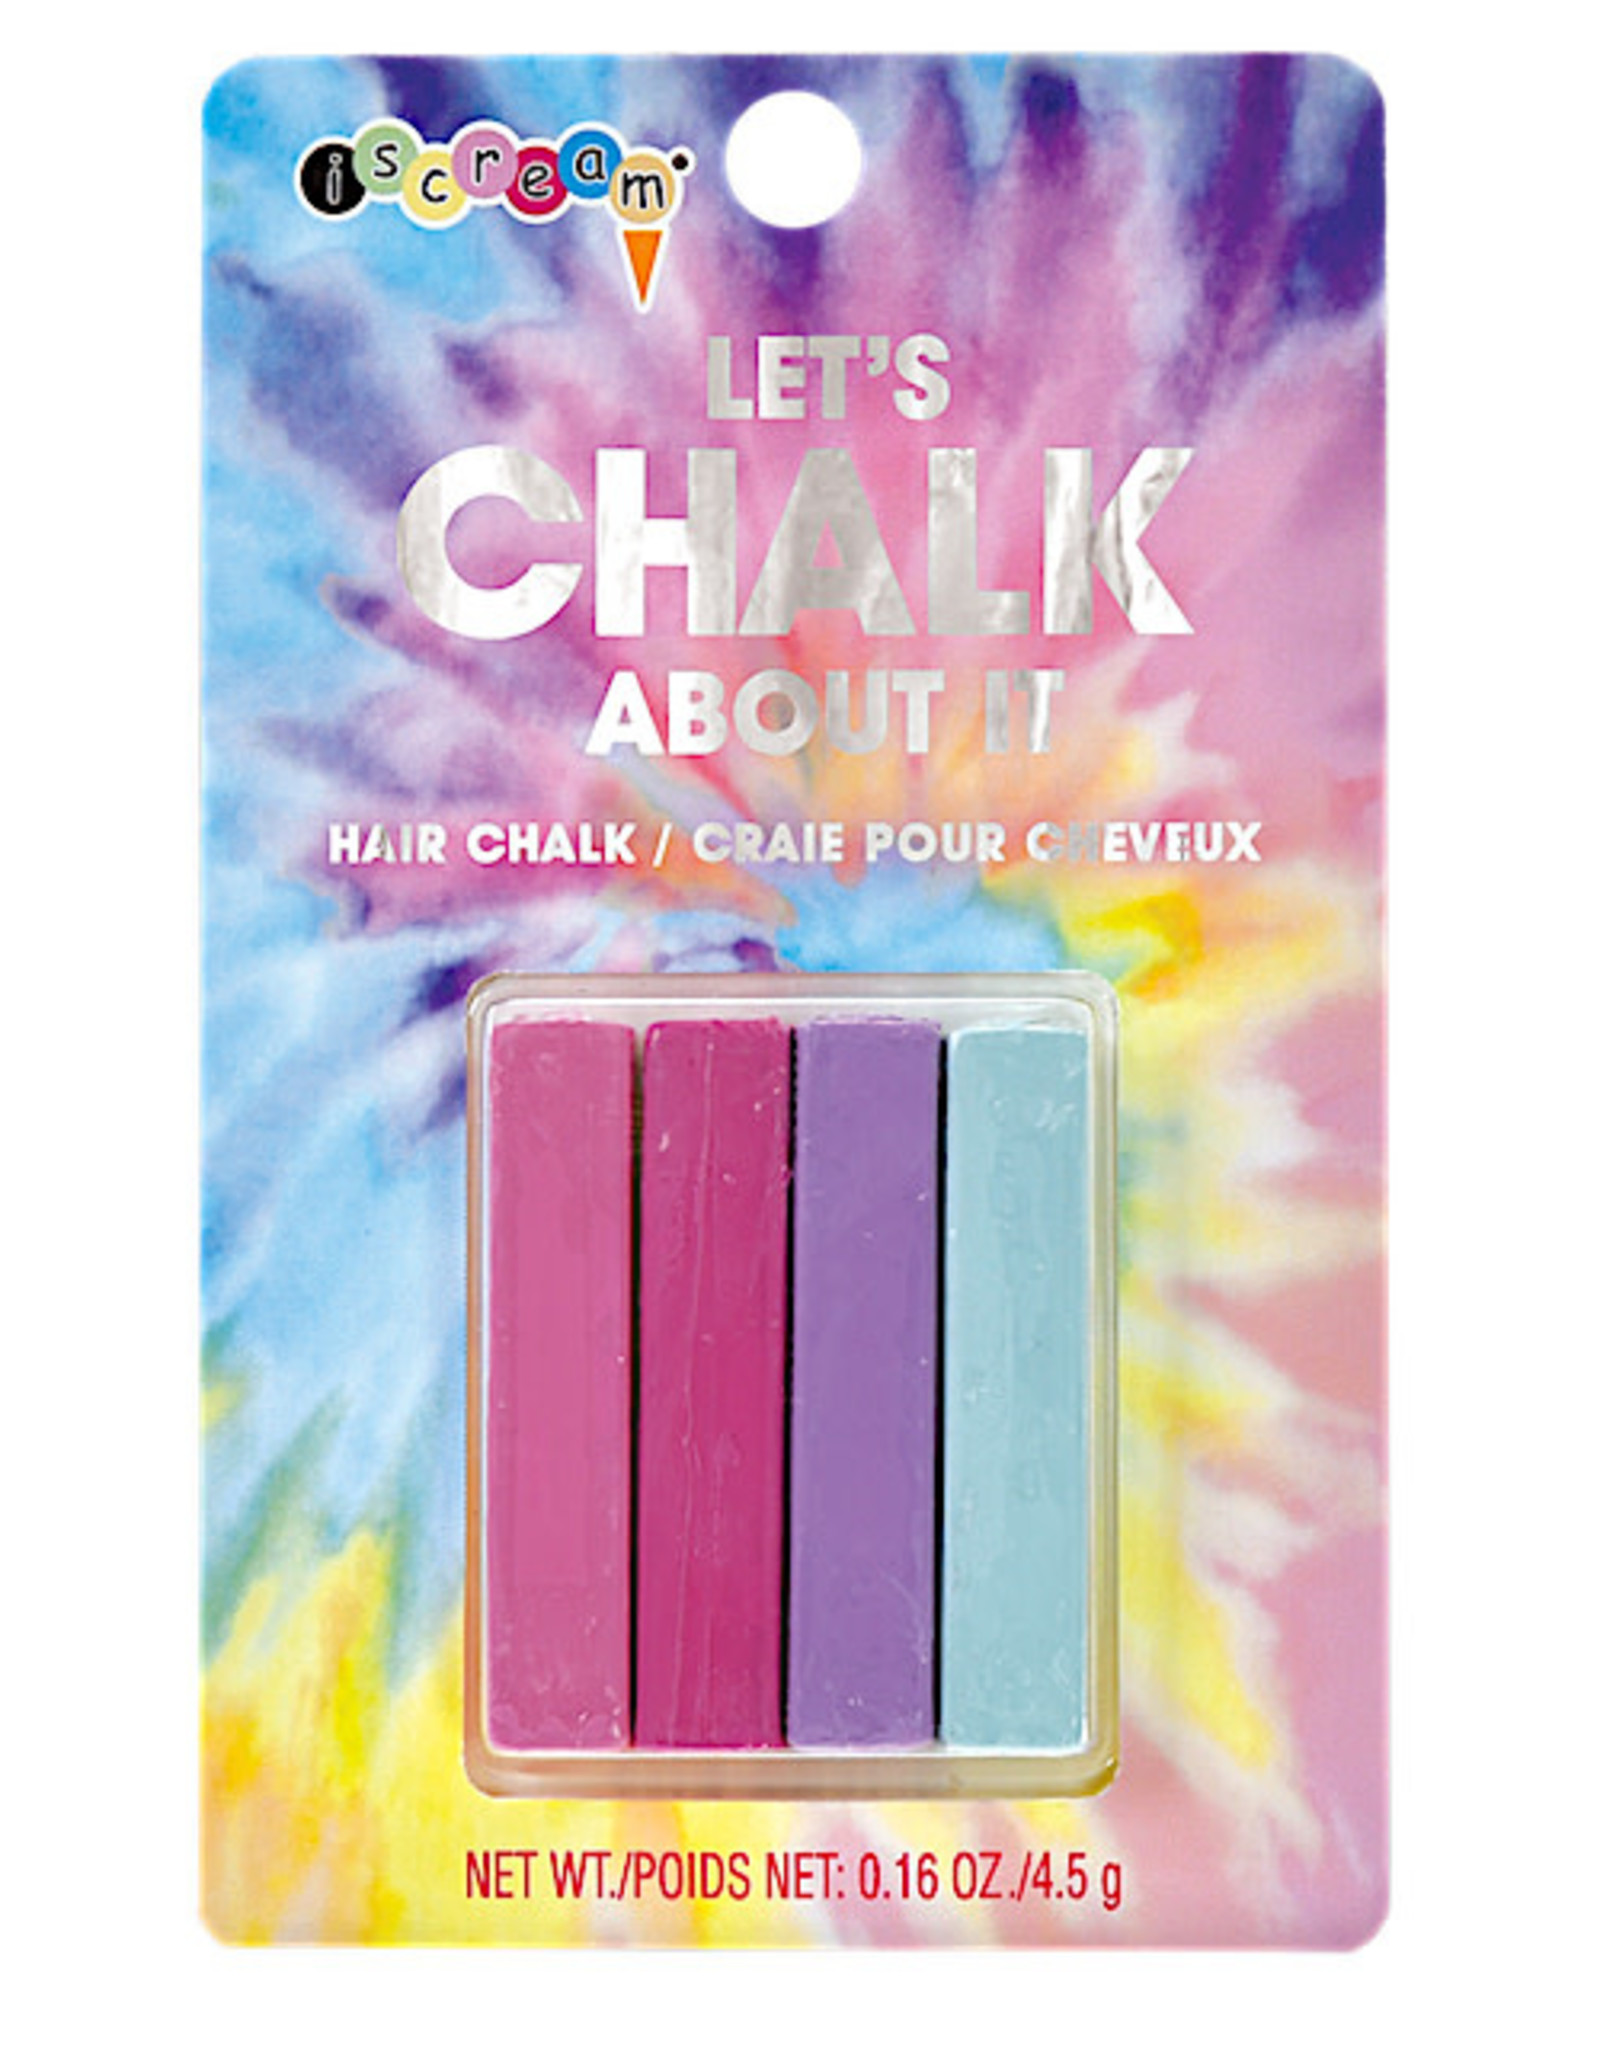 Iscream LET'S CHALK ABOUT HAIR CHALK